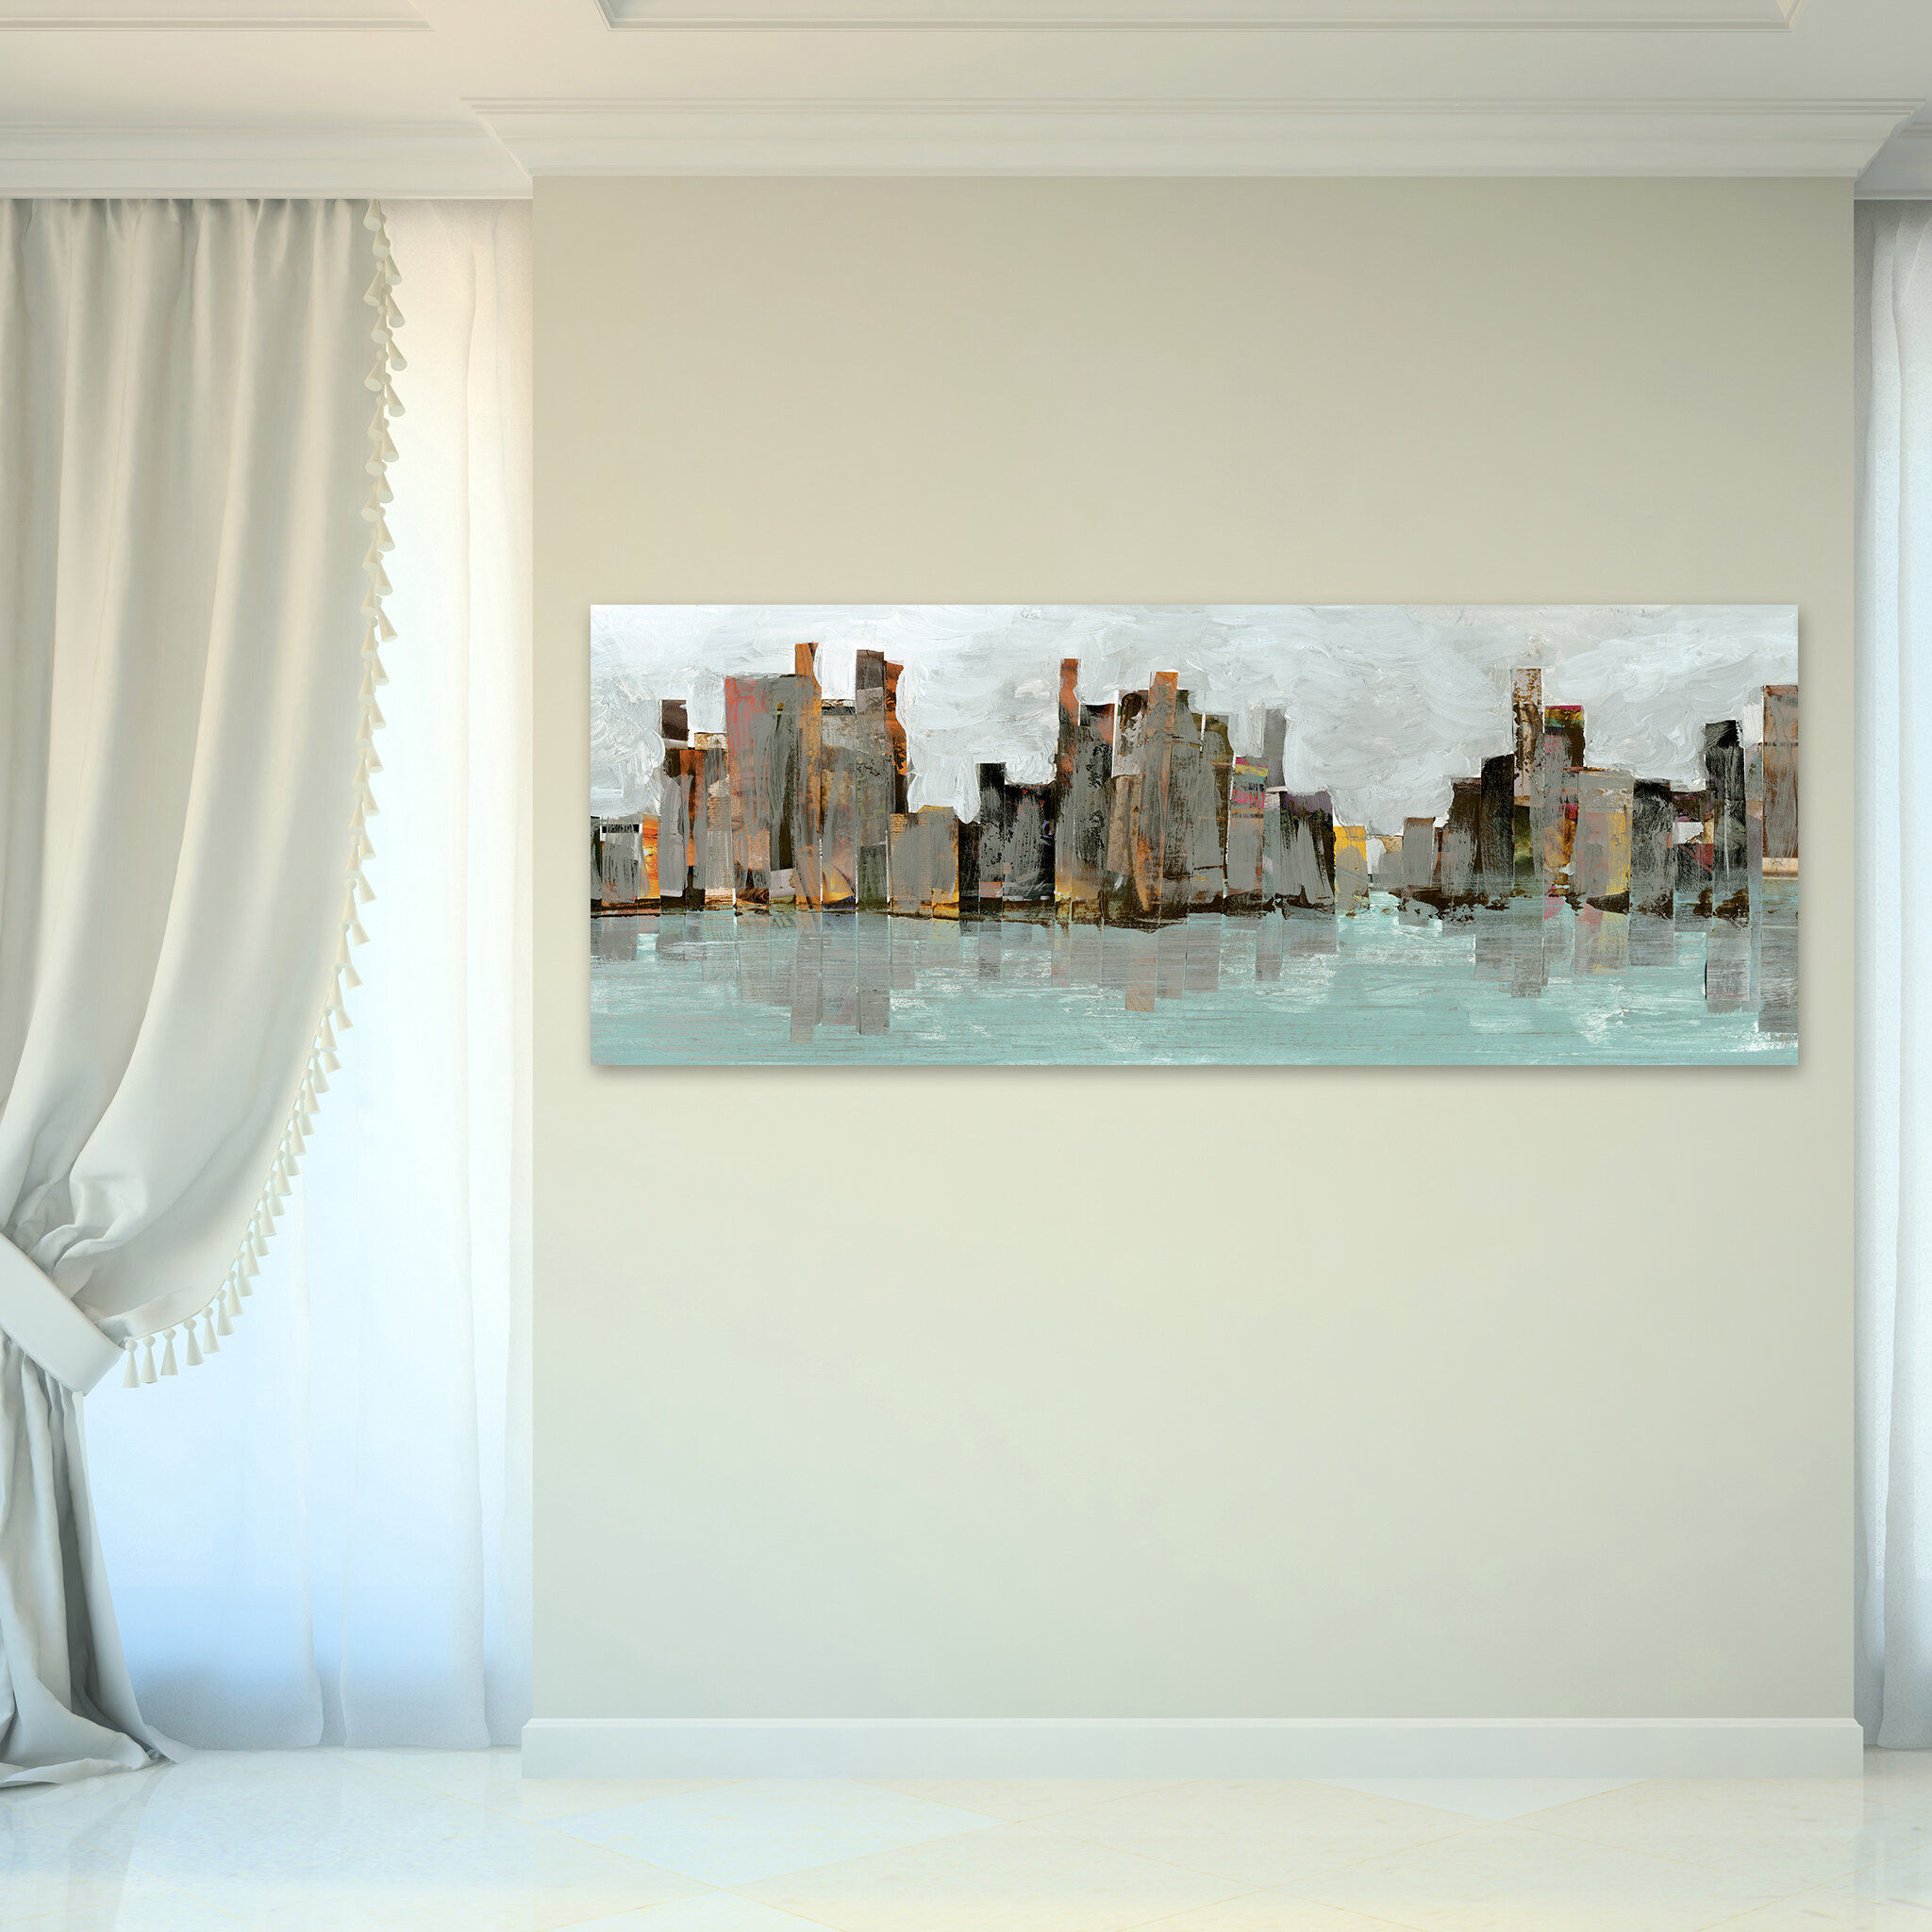 Big Book of Style Frameless Free Floating Tempered Glass Panel Graphic Wall Art - Multi-Color